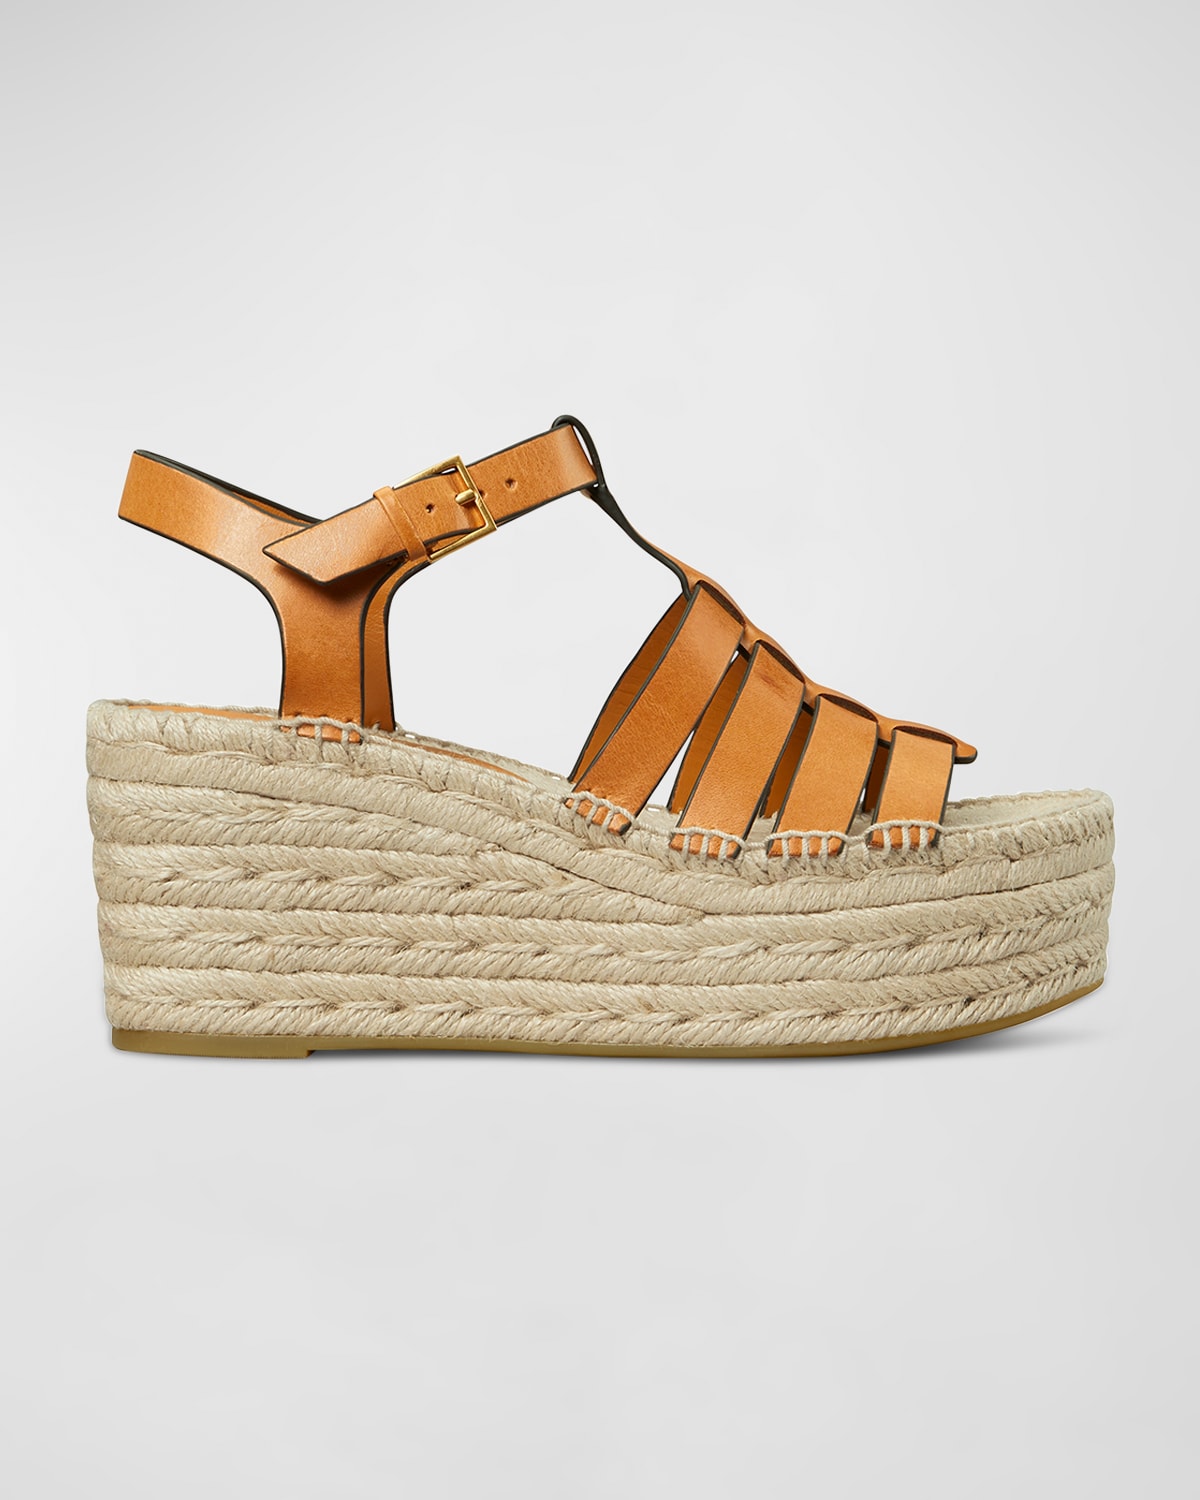 TORY BURCH LEATHER WEDGE ESPADRILLE FISHERMAN SANDALS